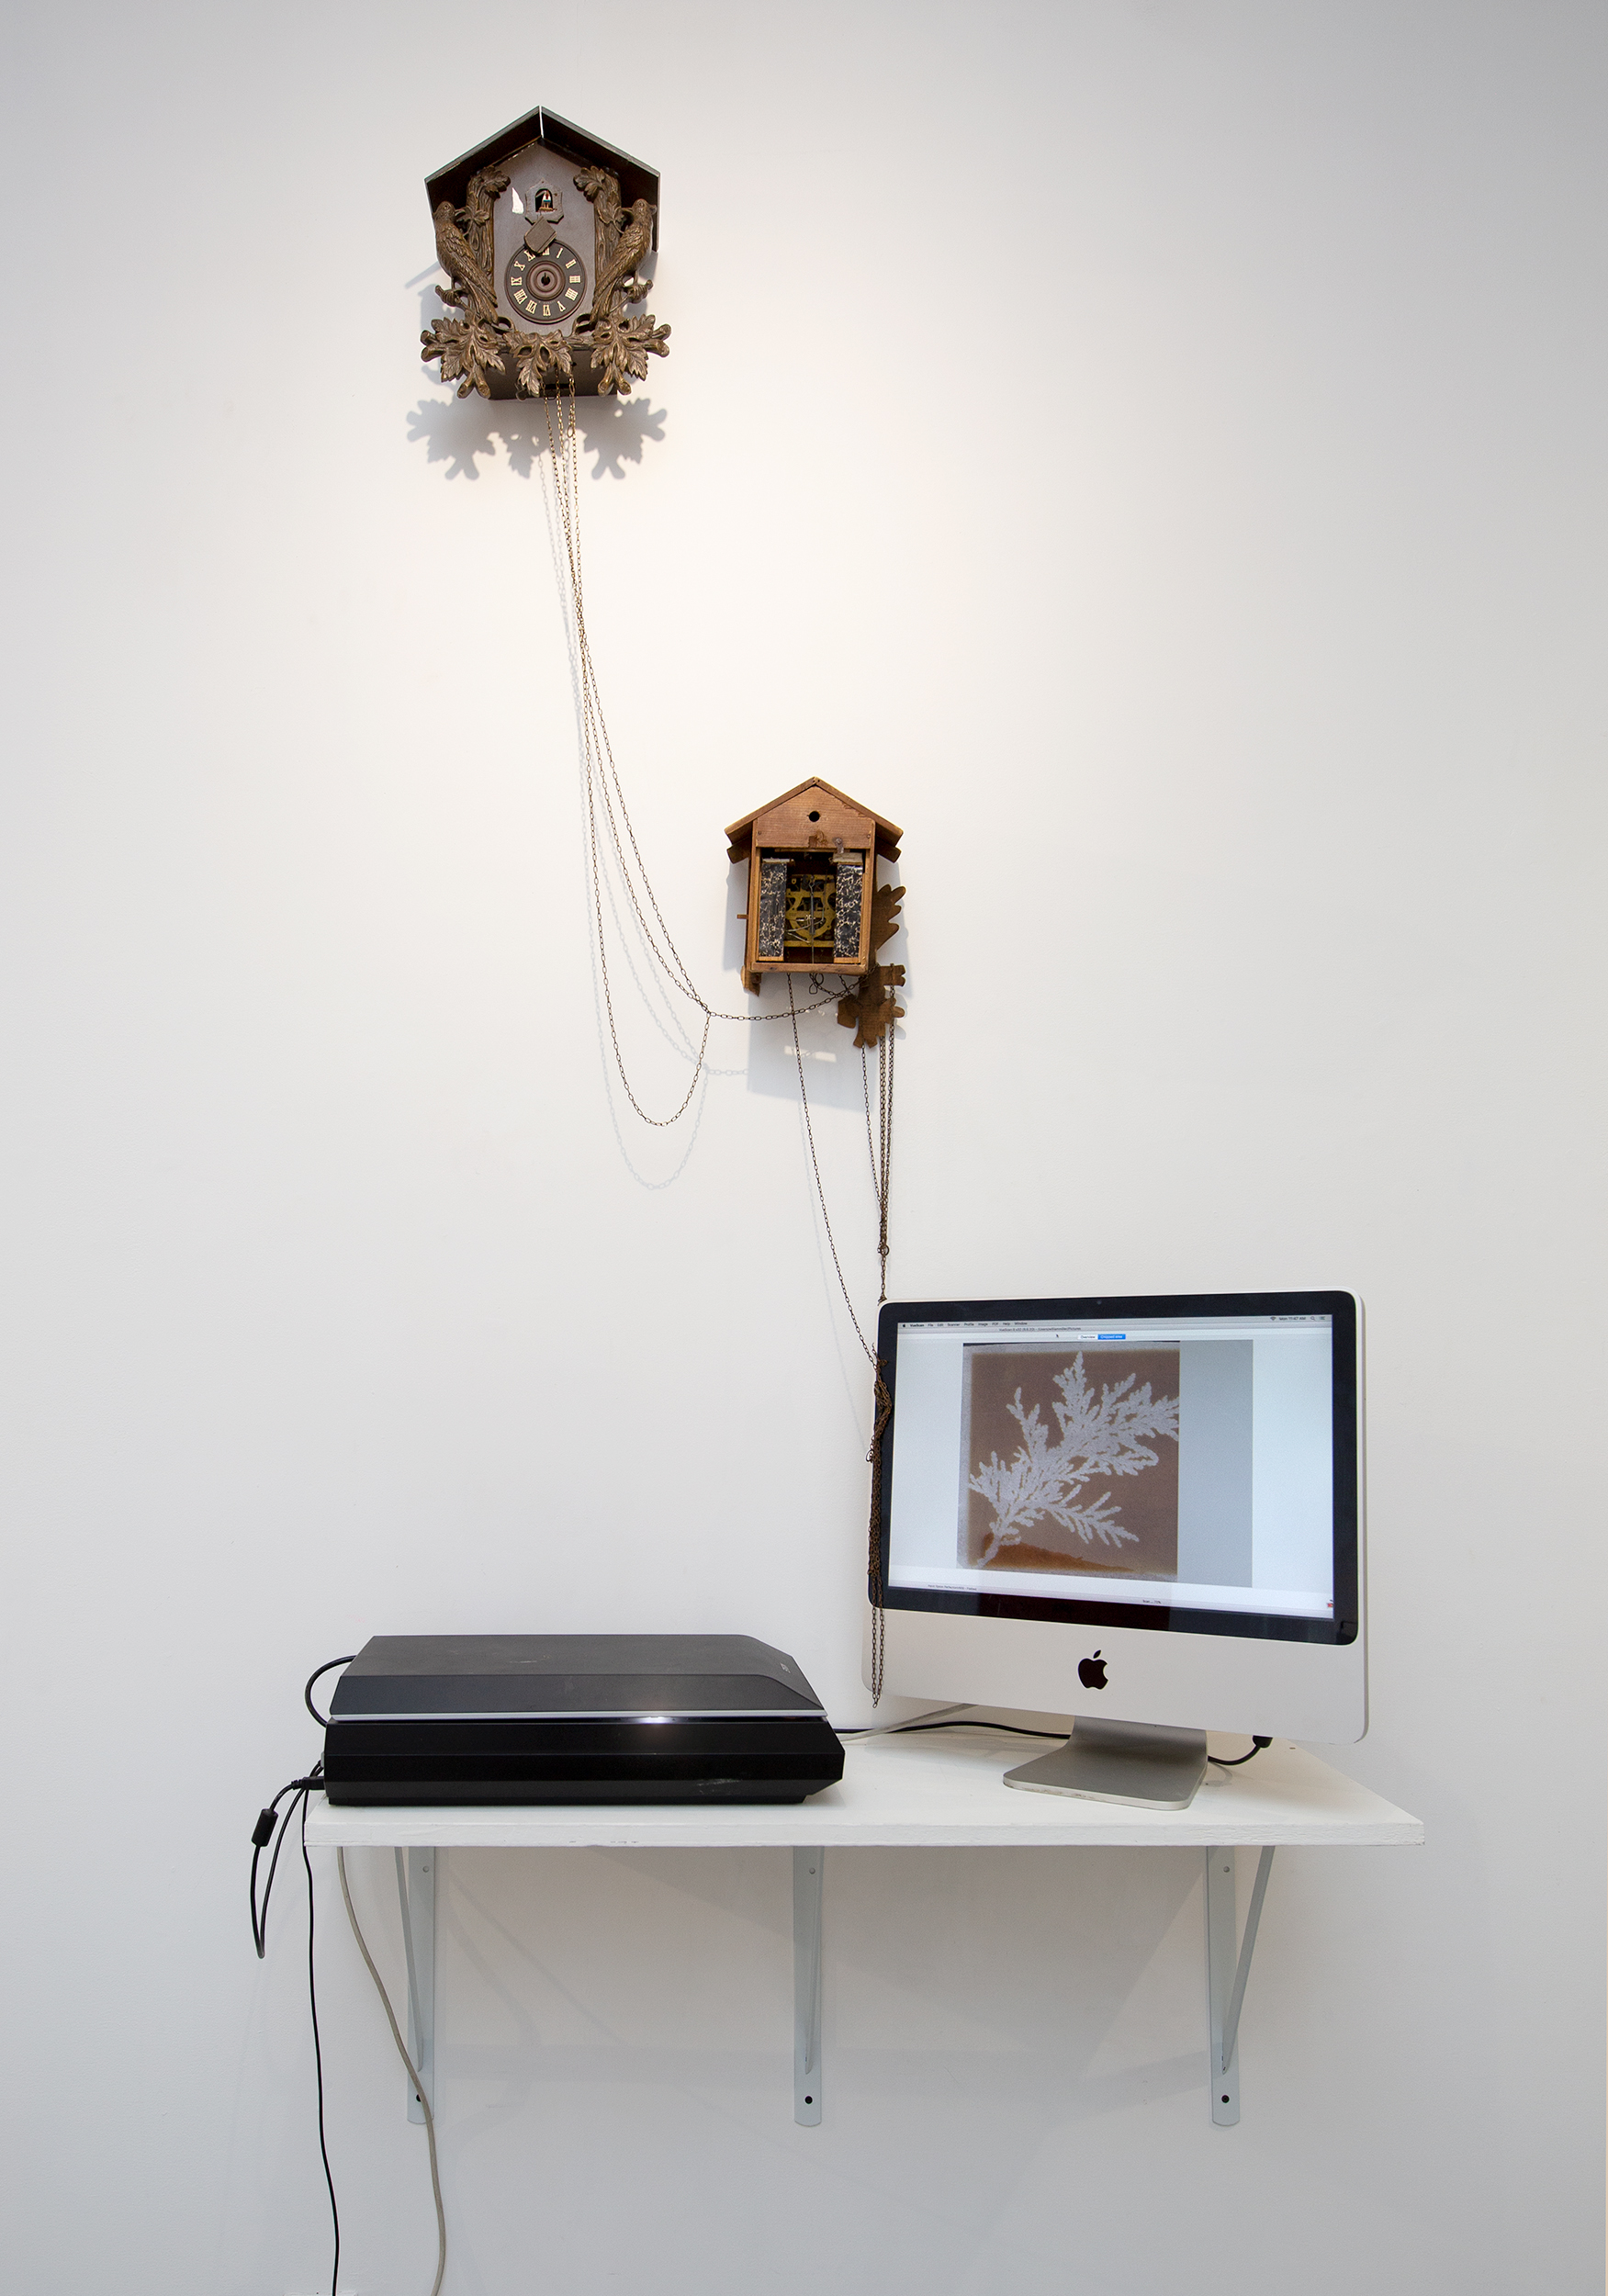 Making the Transitory Impermanent, Making the Fugitive Ephemeral, Making the Interim Provisional,  2018, scanner, desktop computer, calotype, electric chords, cuckoo clocks.